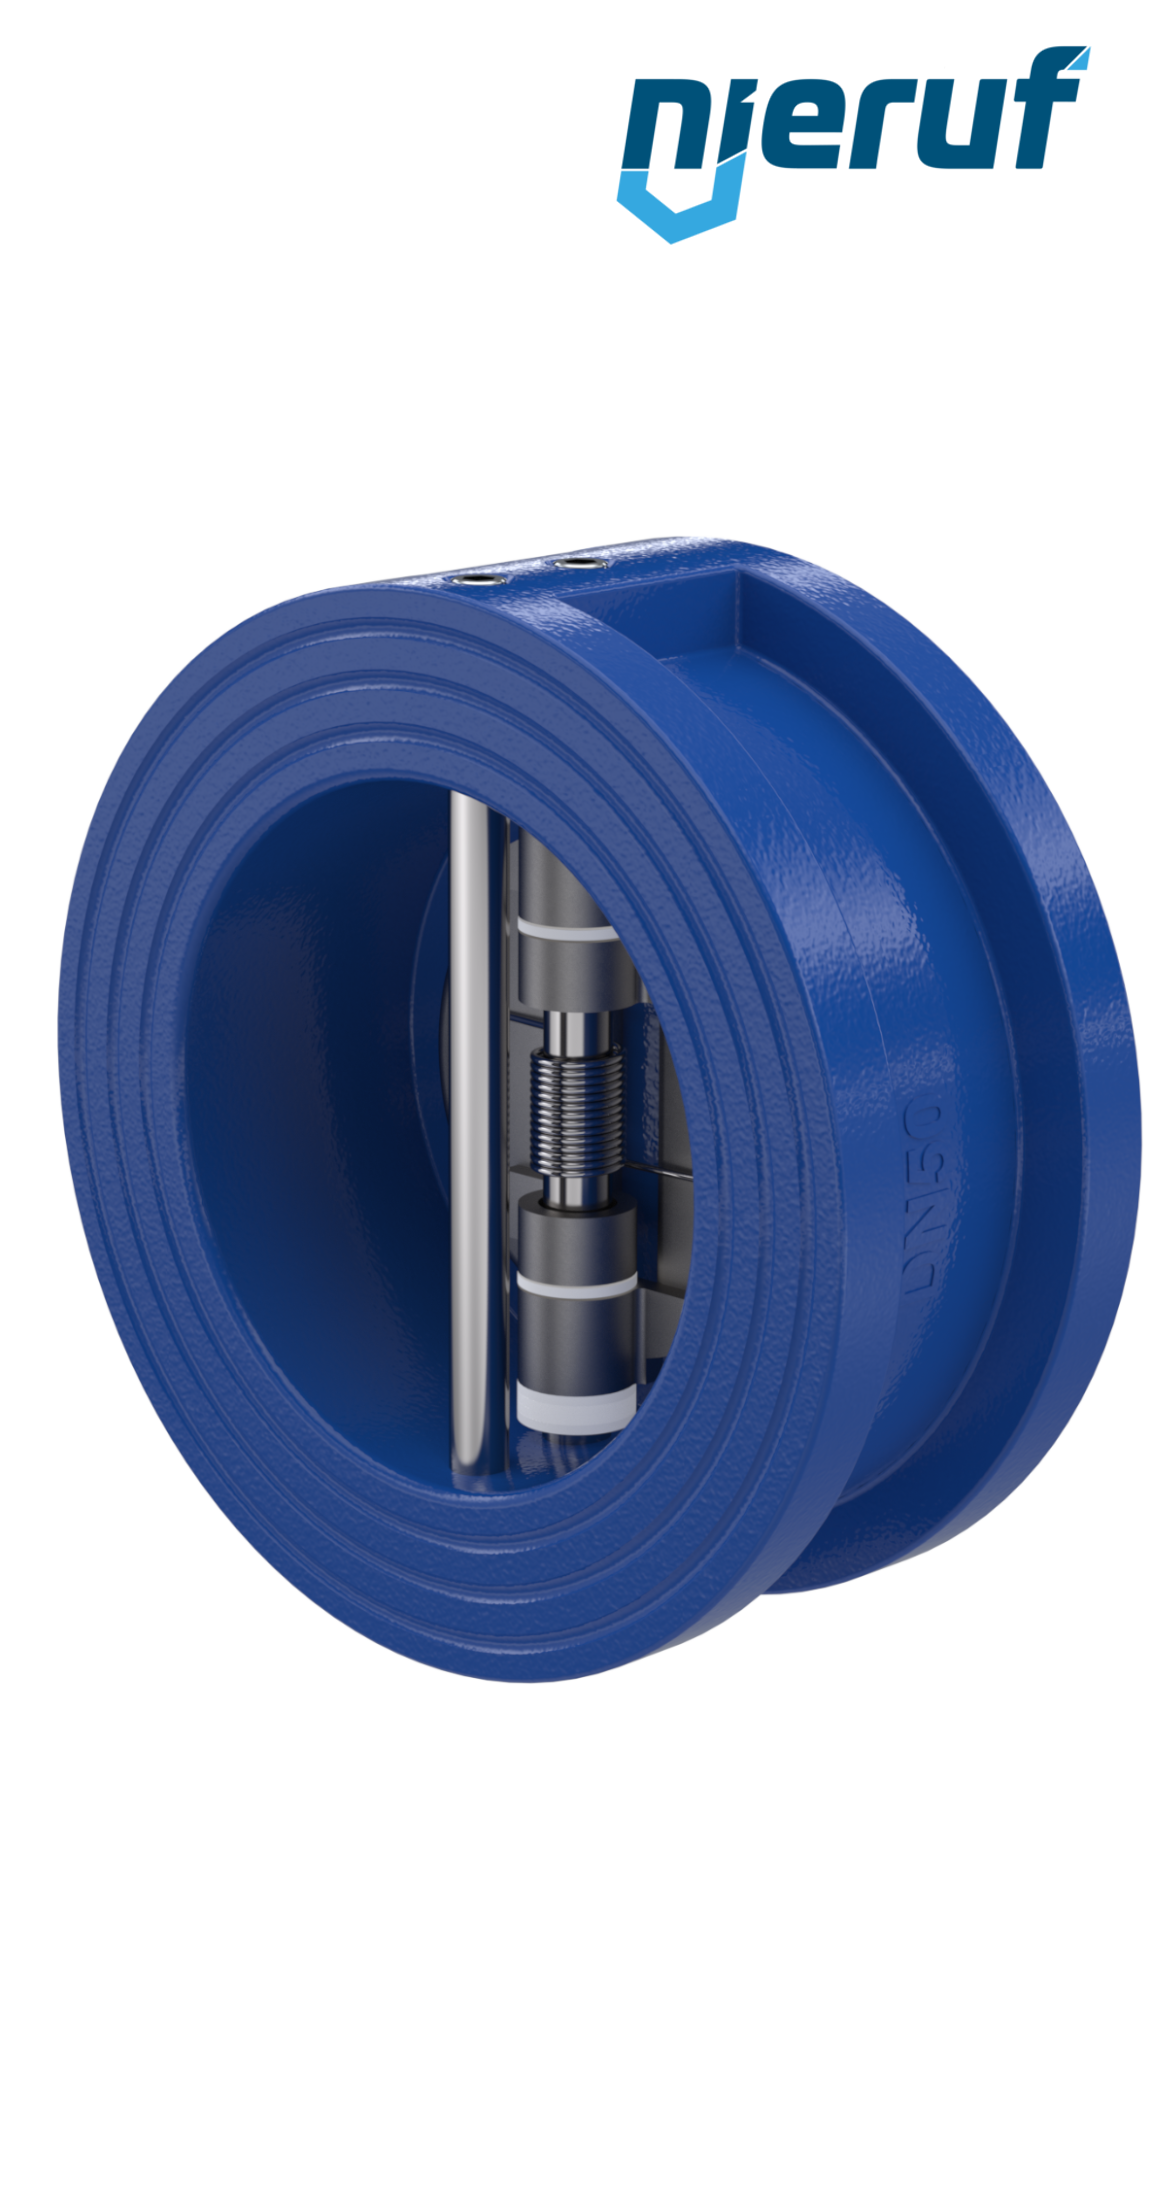 dual plate check valve DN50 DR02 GGG40 epoxyd plated blue 180µm EPDM